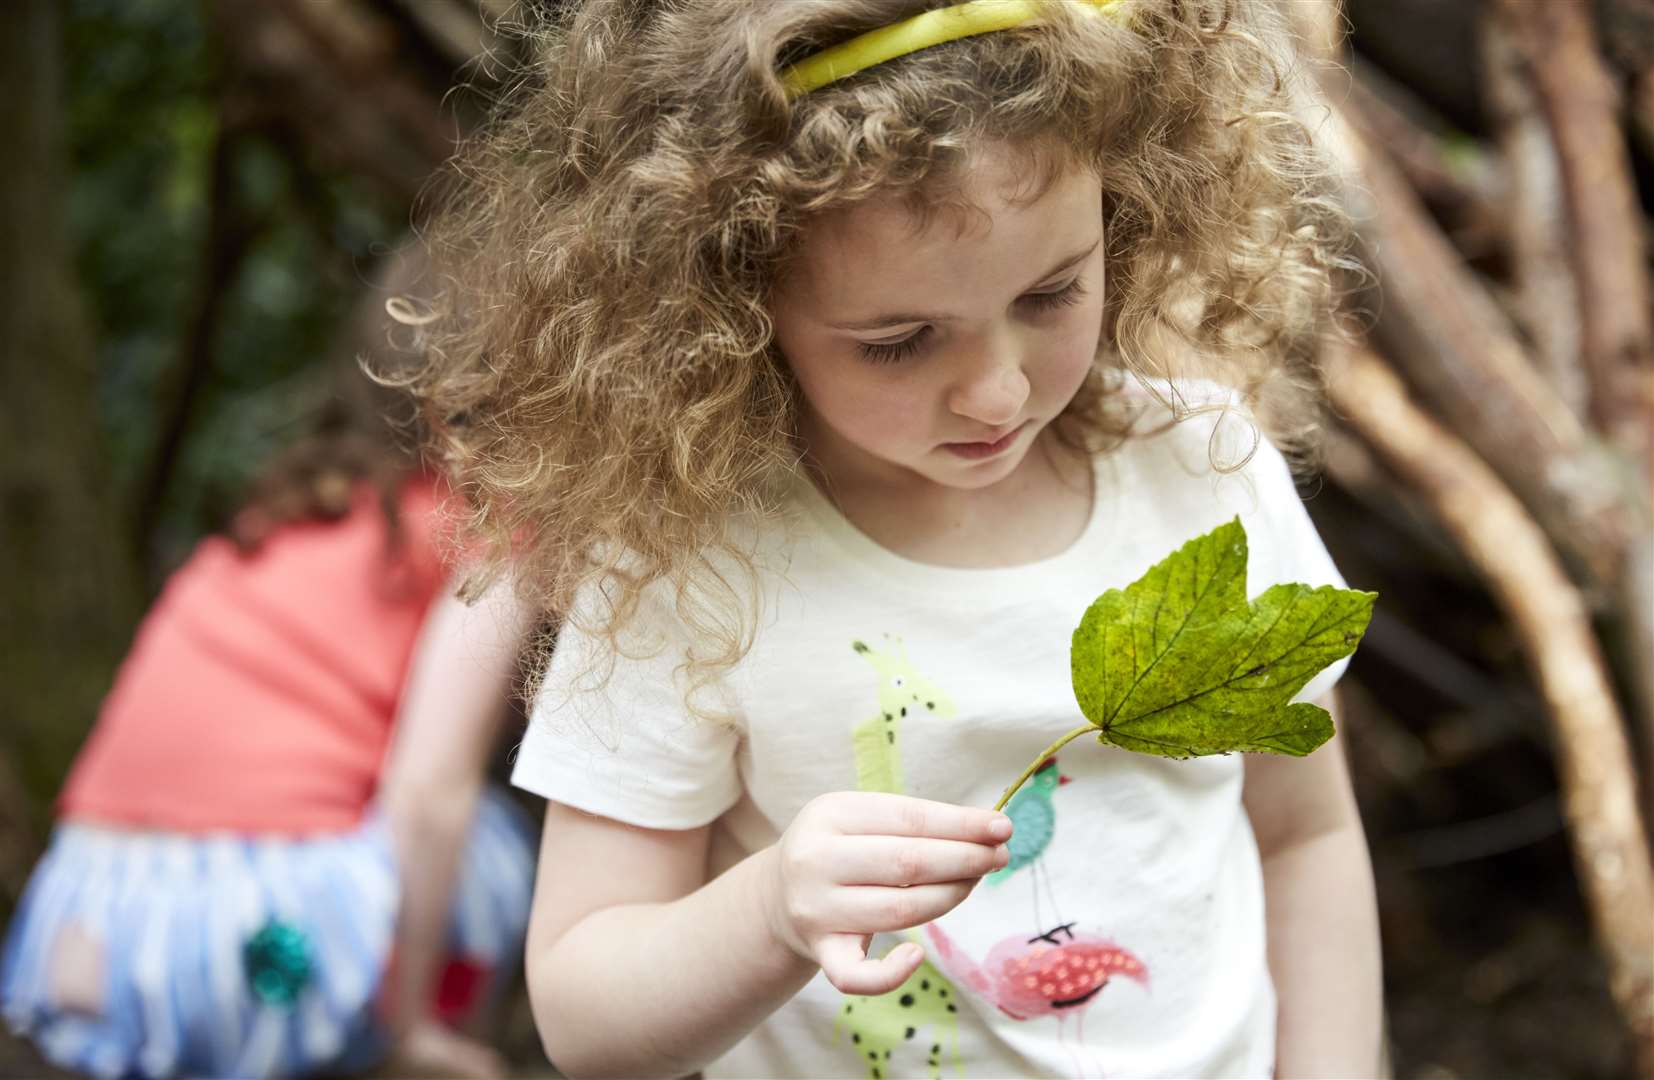 There are still some summer activities with the National Trust